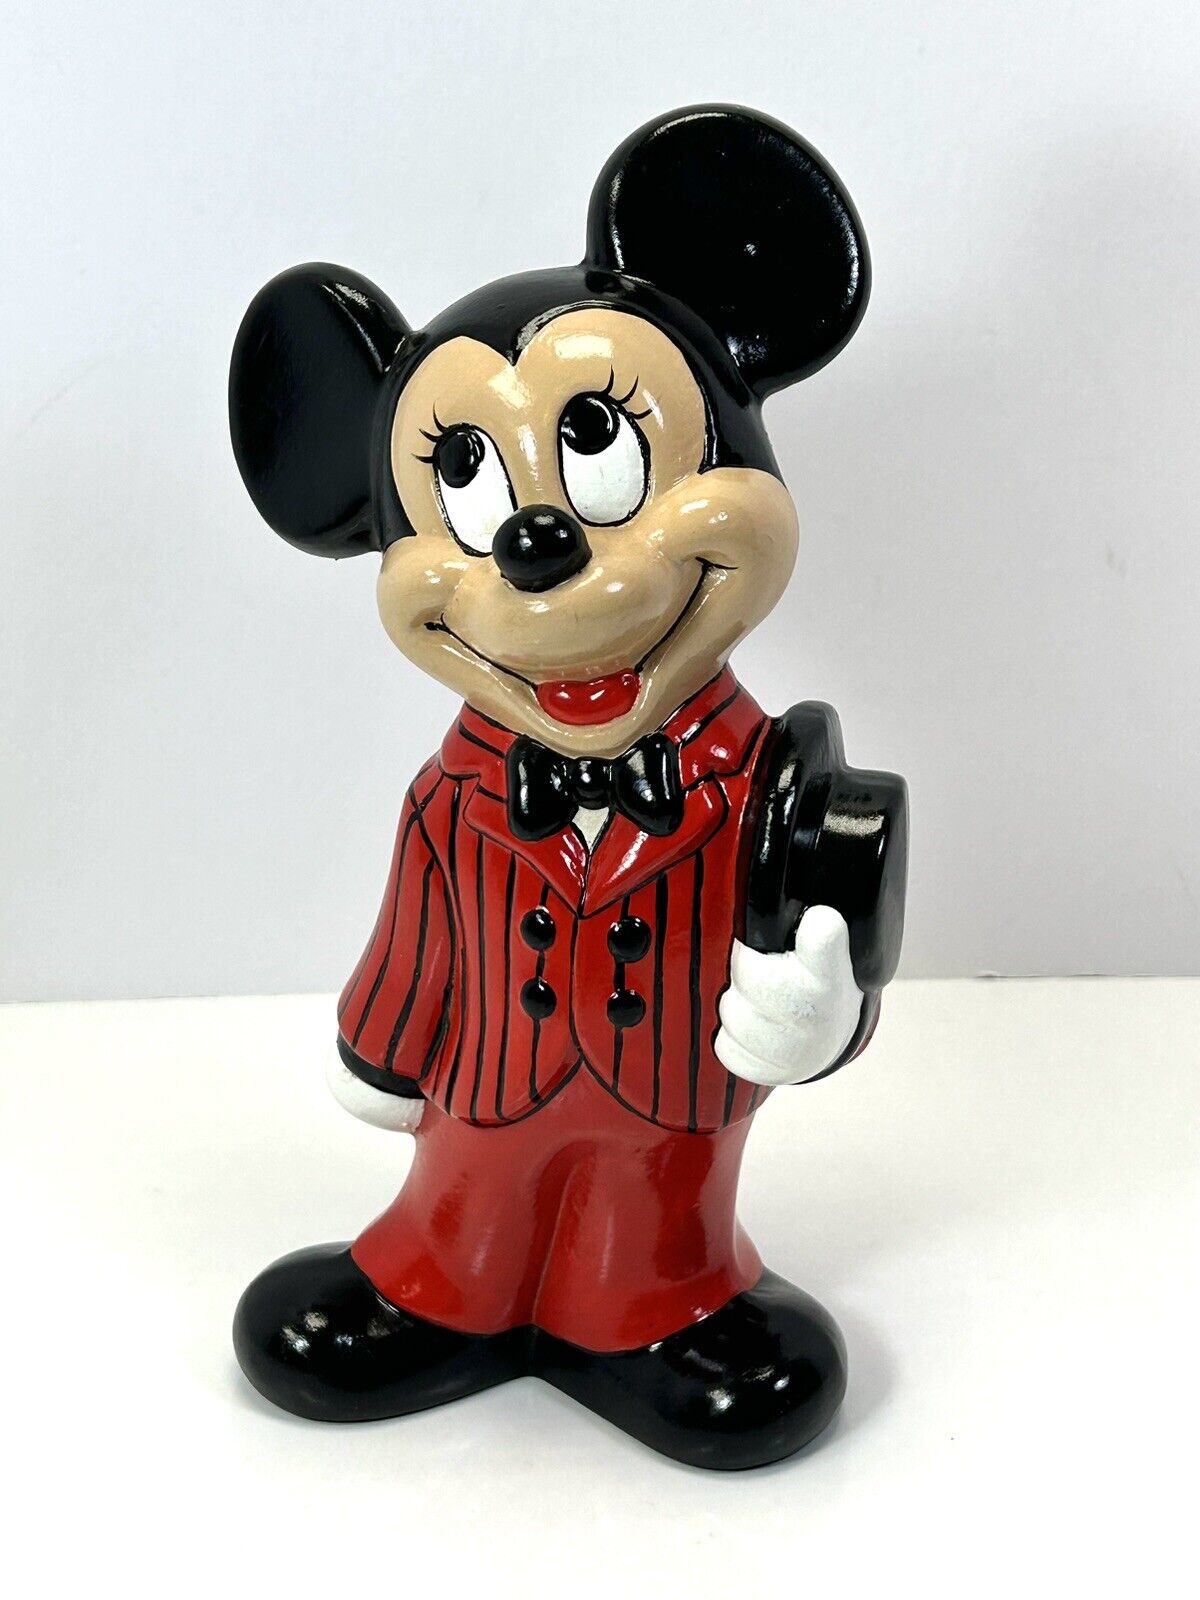 Vintage 1977 Walt Disney Ceramic Mickey Mouse Figure Statue/Holding Top Hat Red